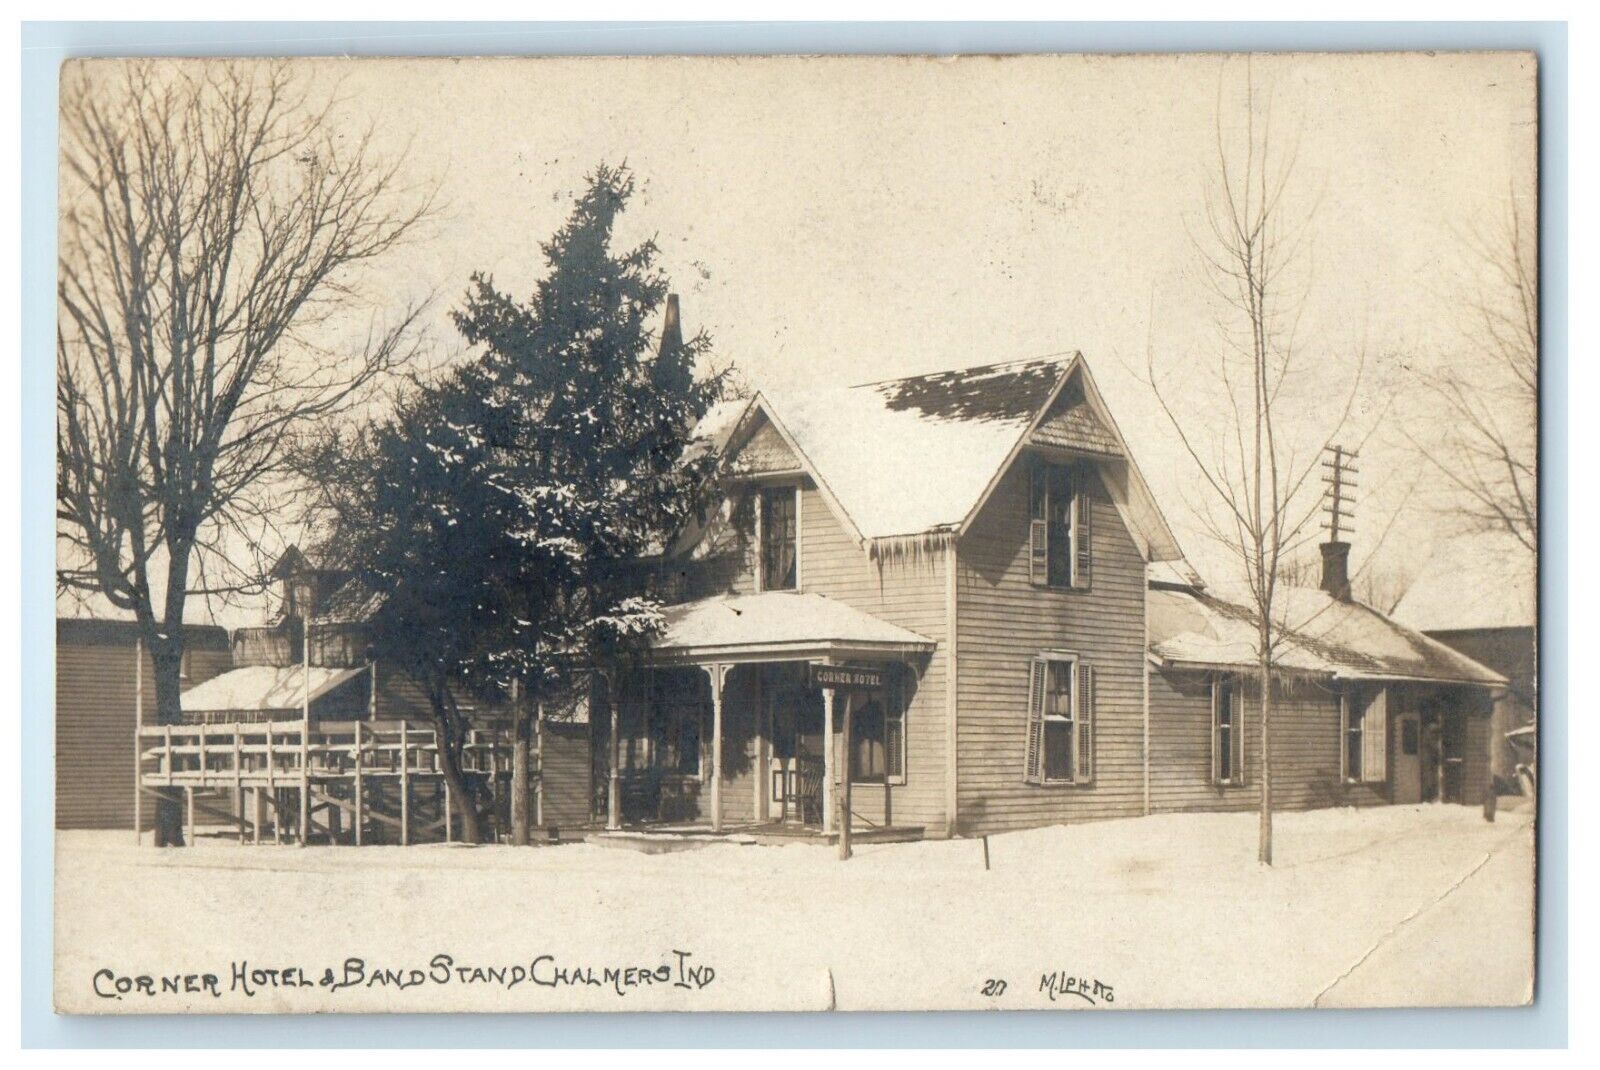 1910 Corner Hotel & Band Stand Chalmers Indiana IN RPPC Photo Antique Postcard